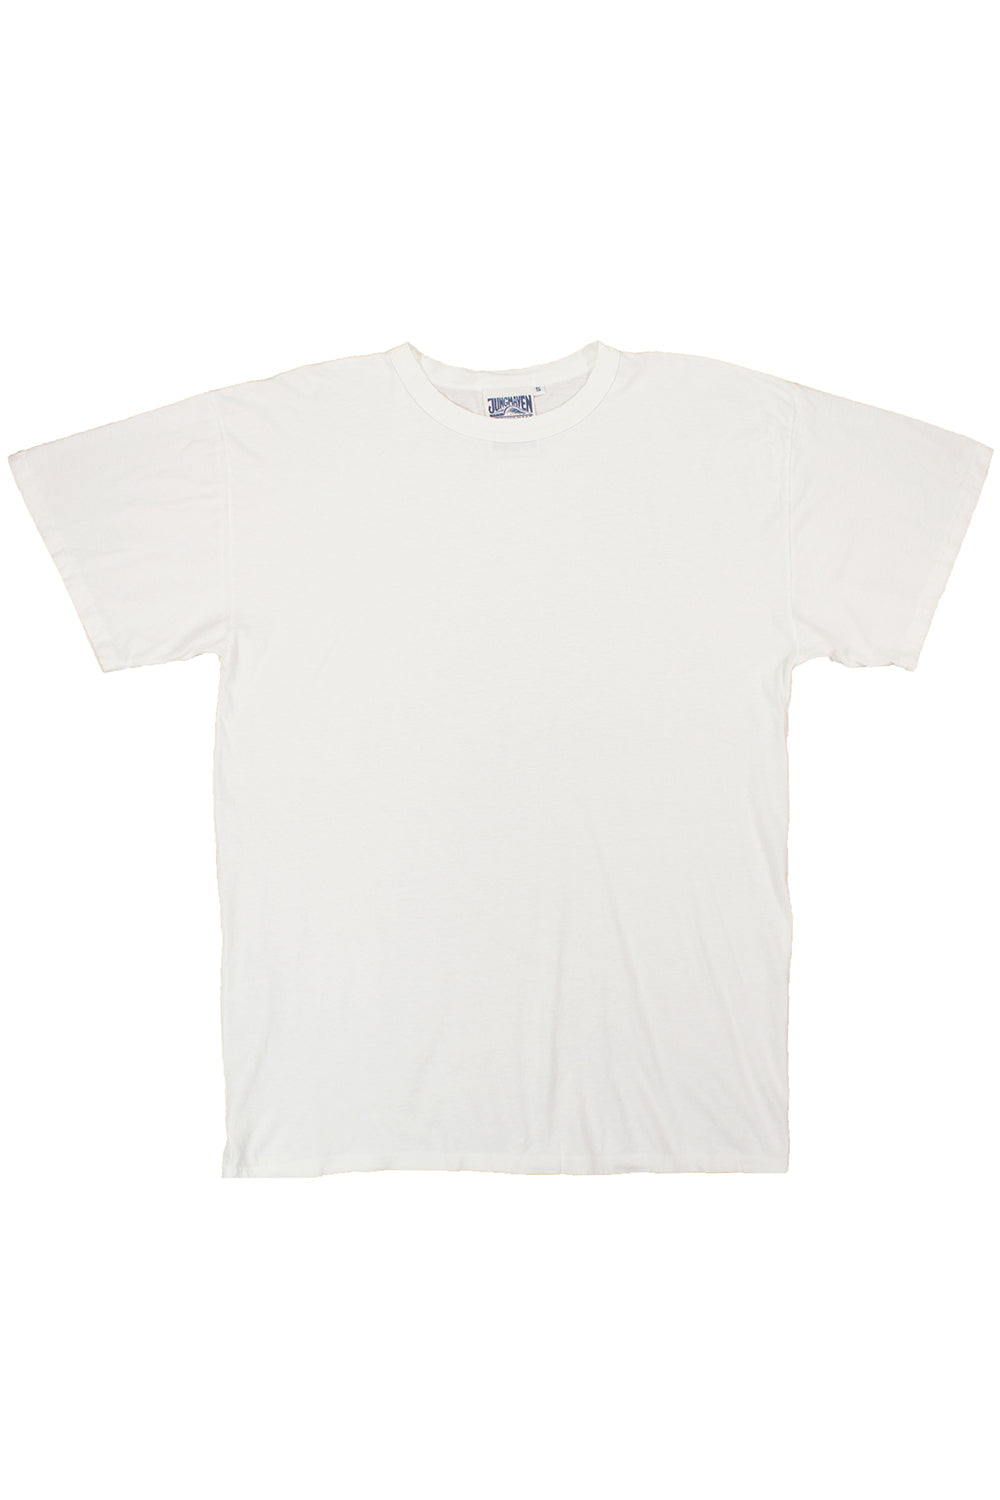 Index Tee | Jungmaven Hemp Clothing & Accessories / Color: Washed White